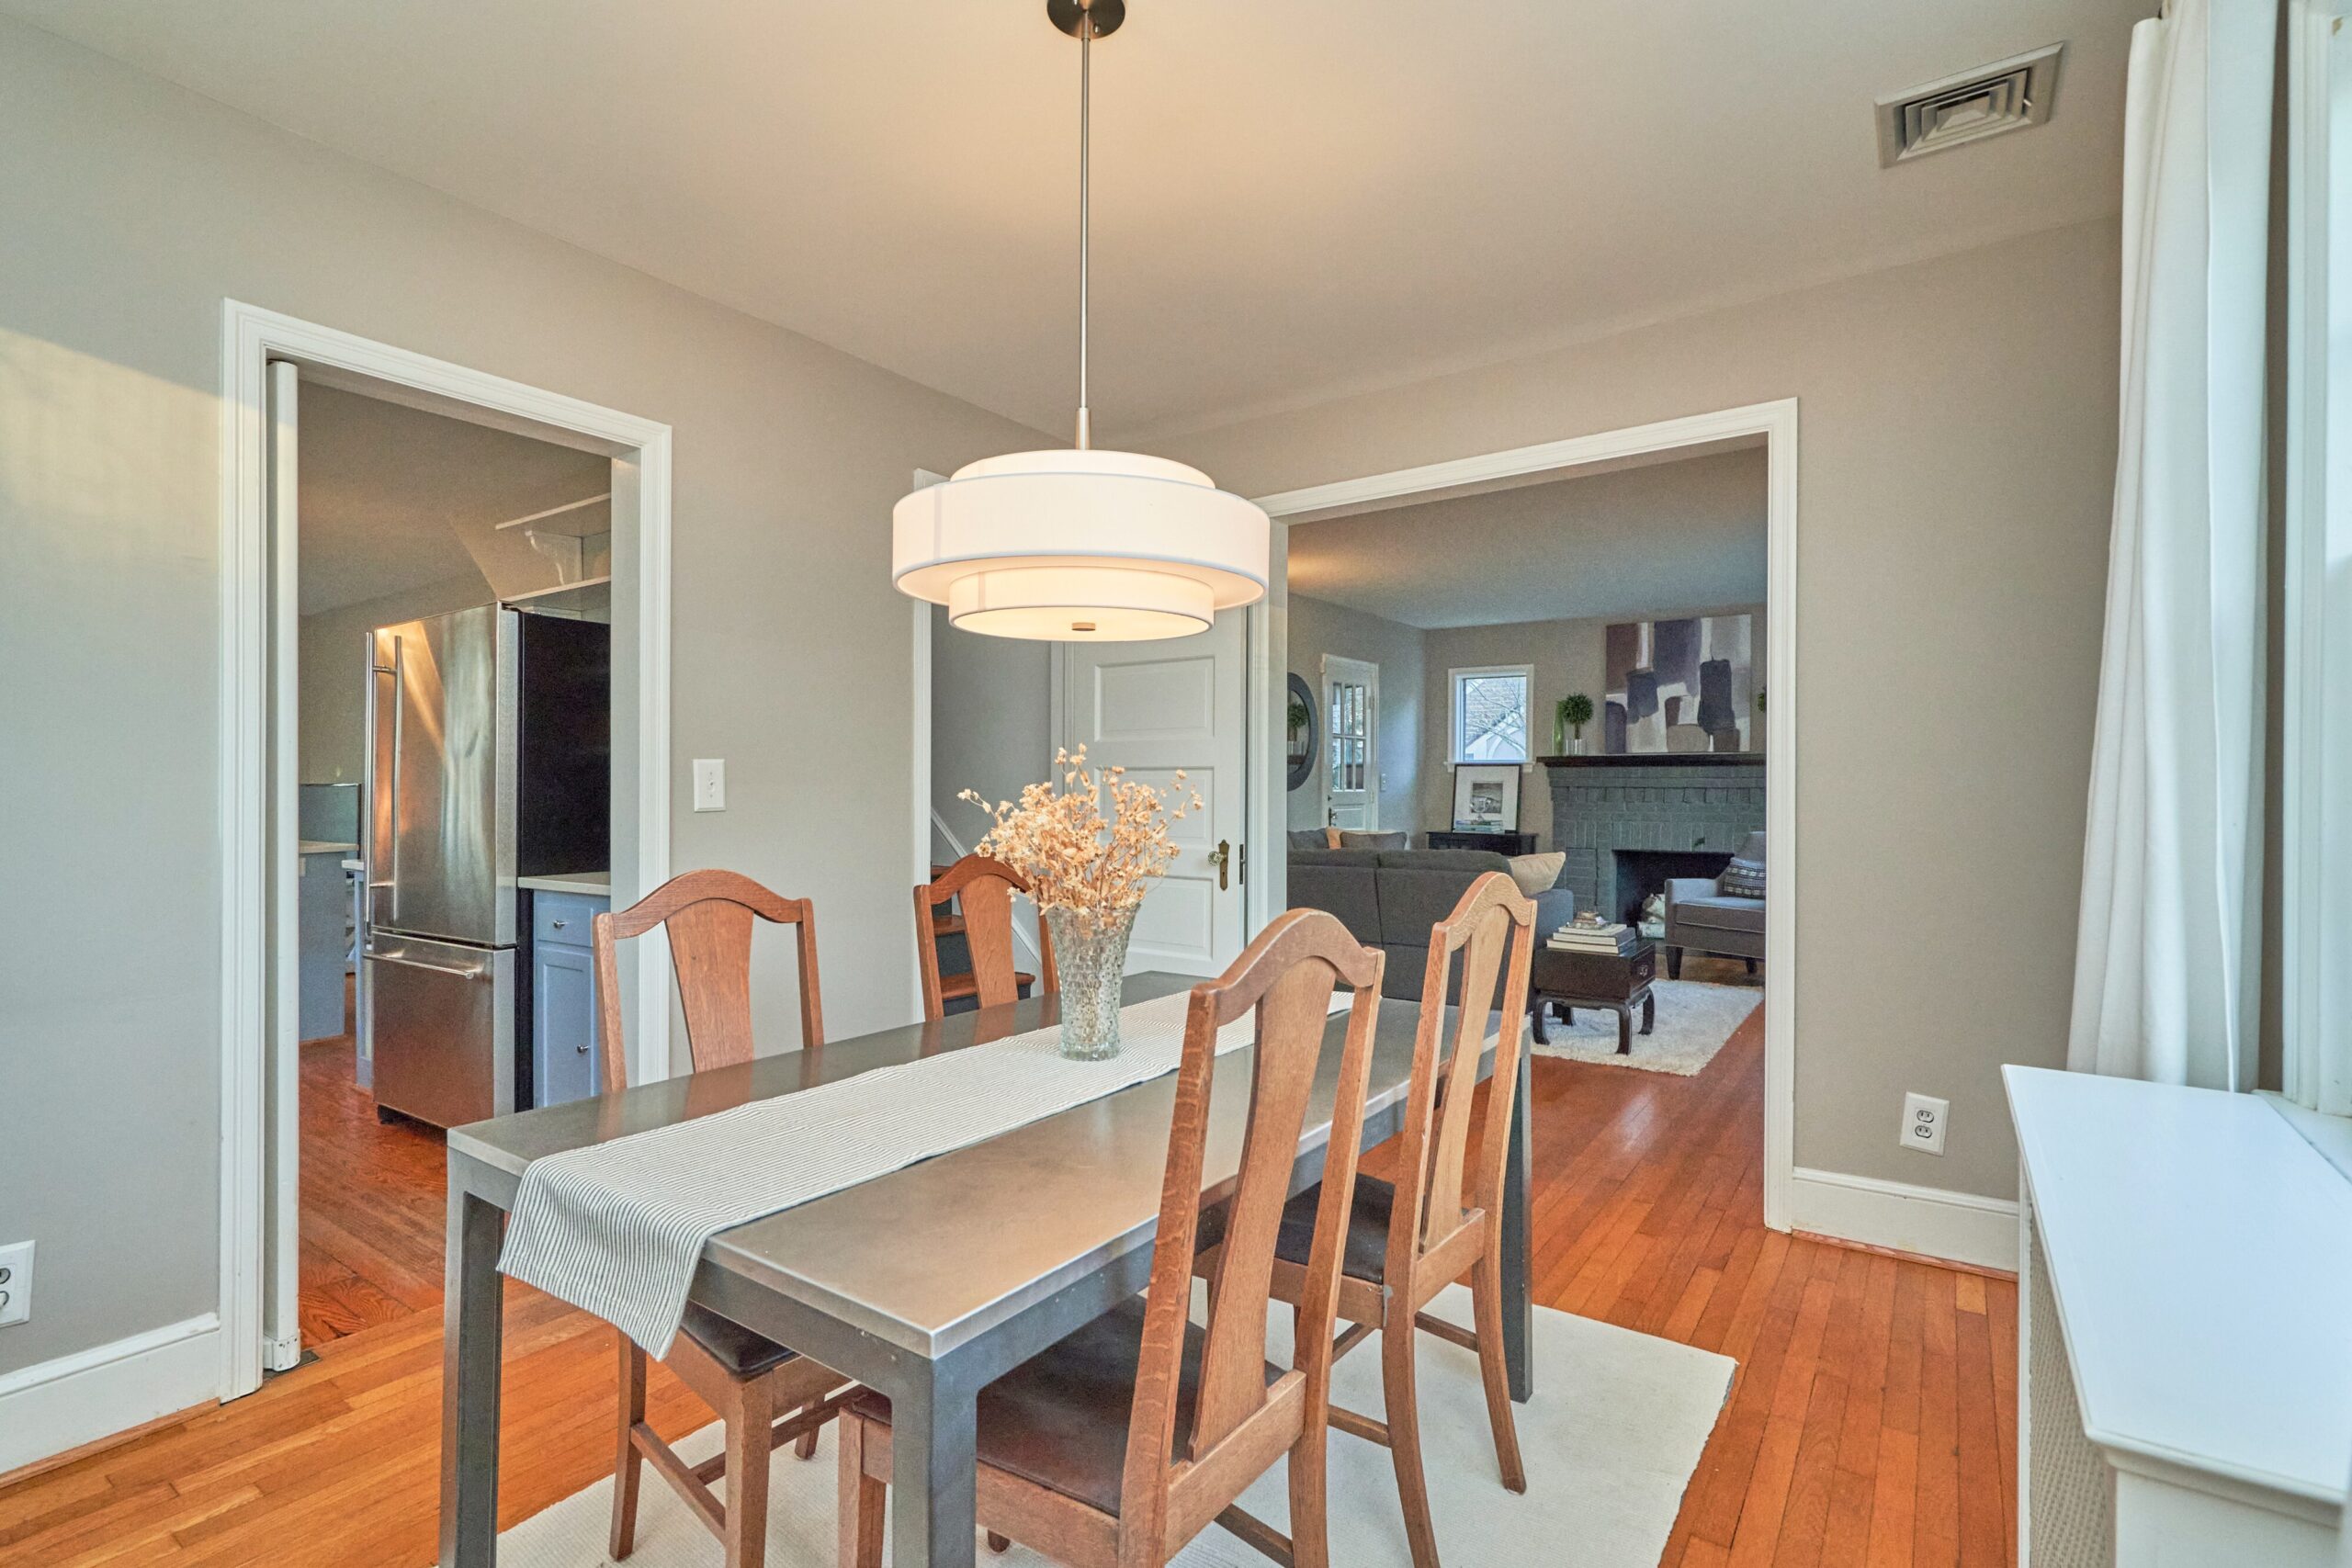 Professional interior photo of 5933 16th St N, Arlington, VA - showing the dining room with hardwood floors